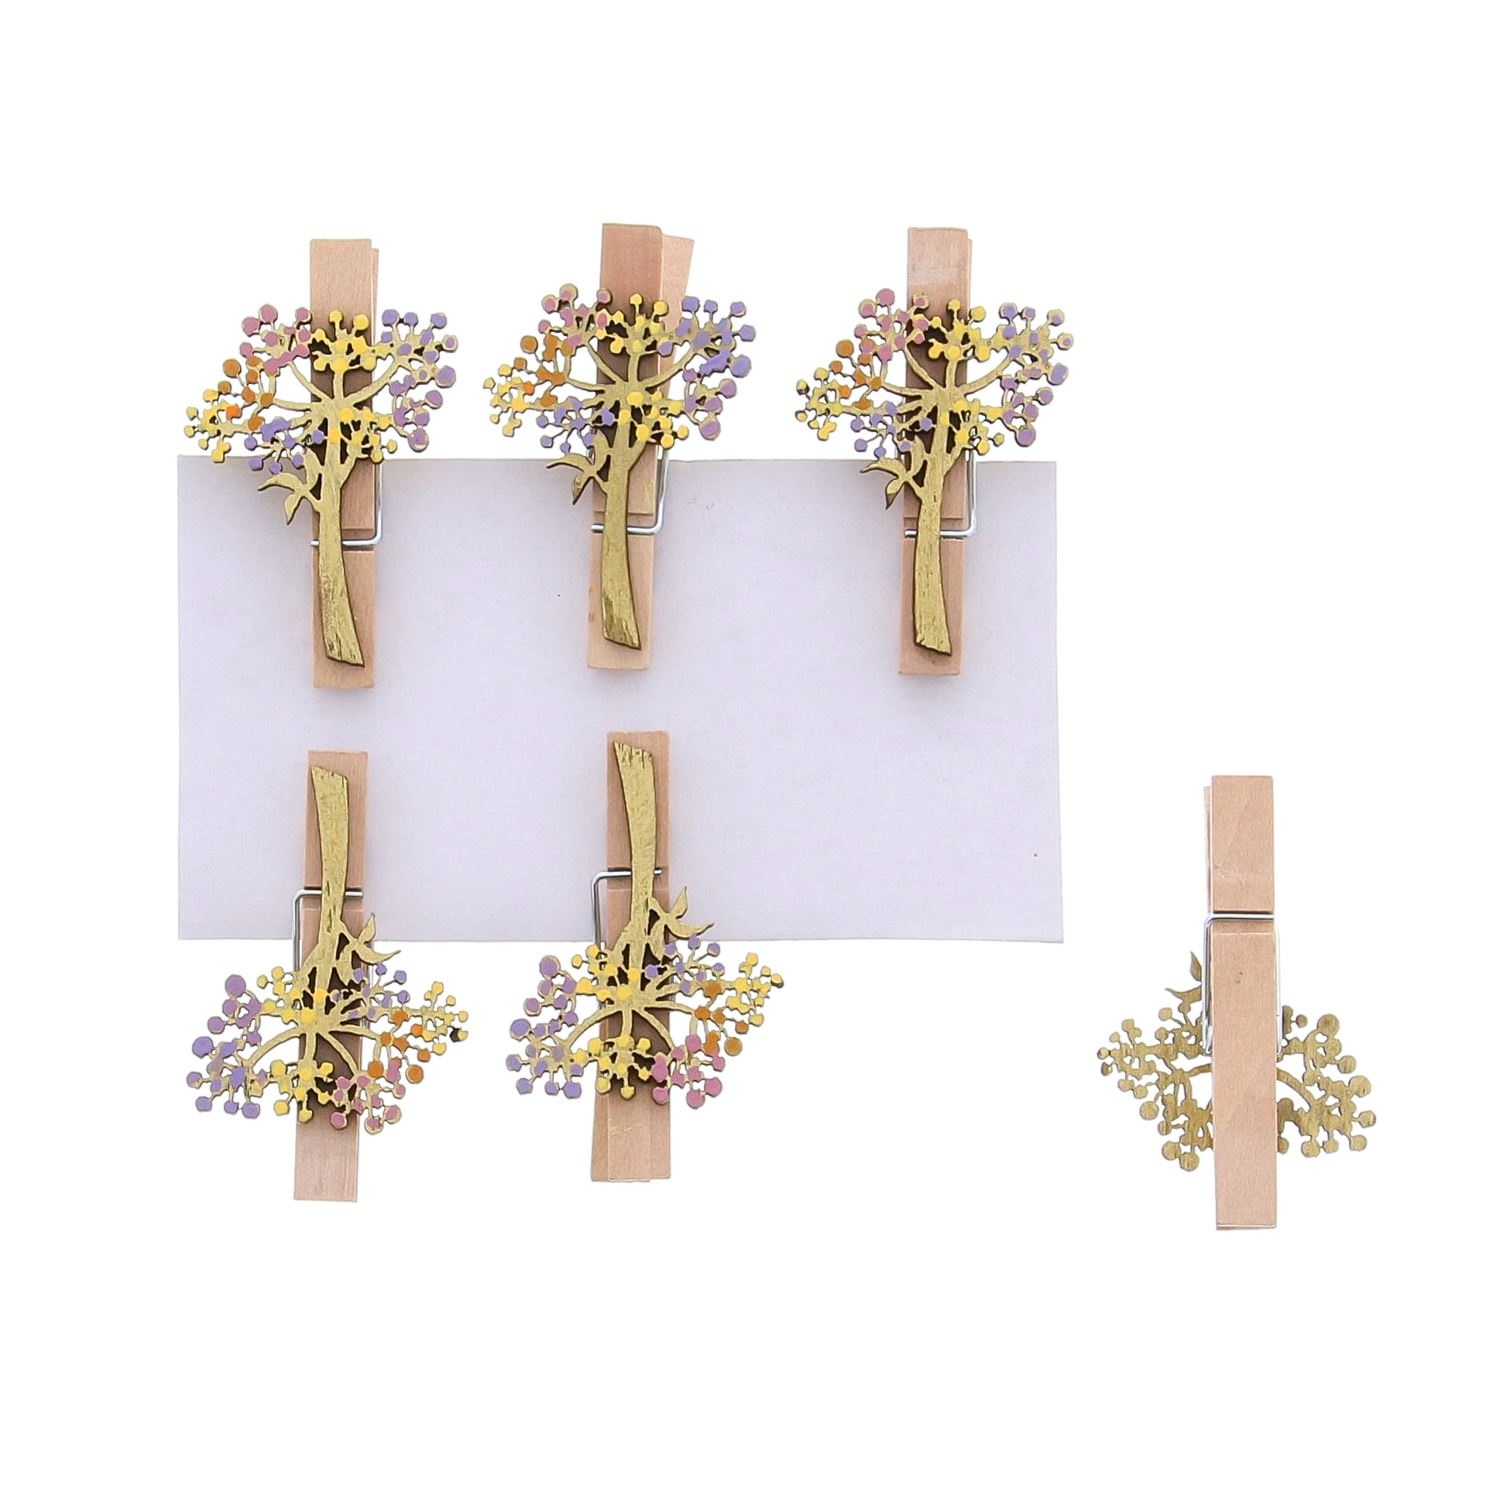 "Dandelion" blow flower with stem in gold clip - 30*12*48 mm - 36 pieces